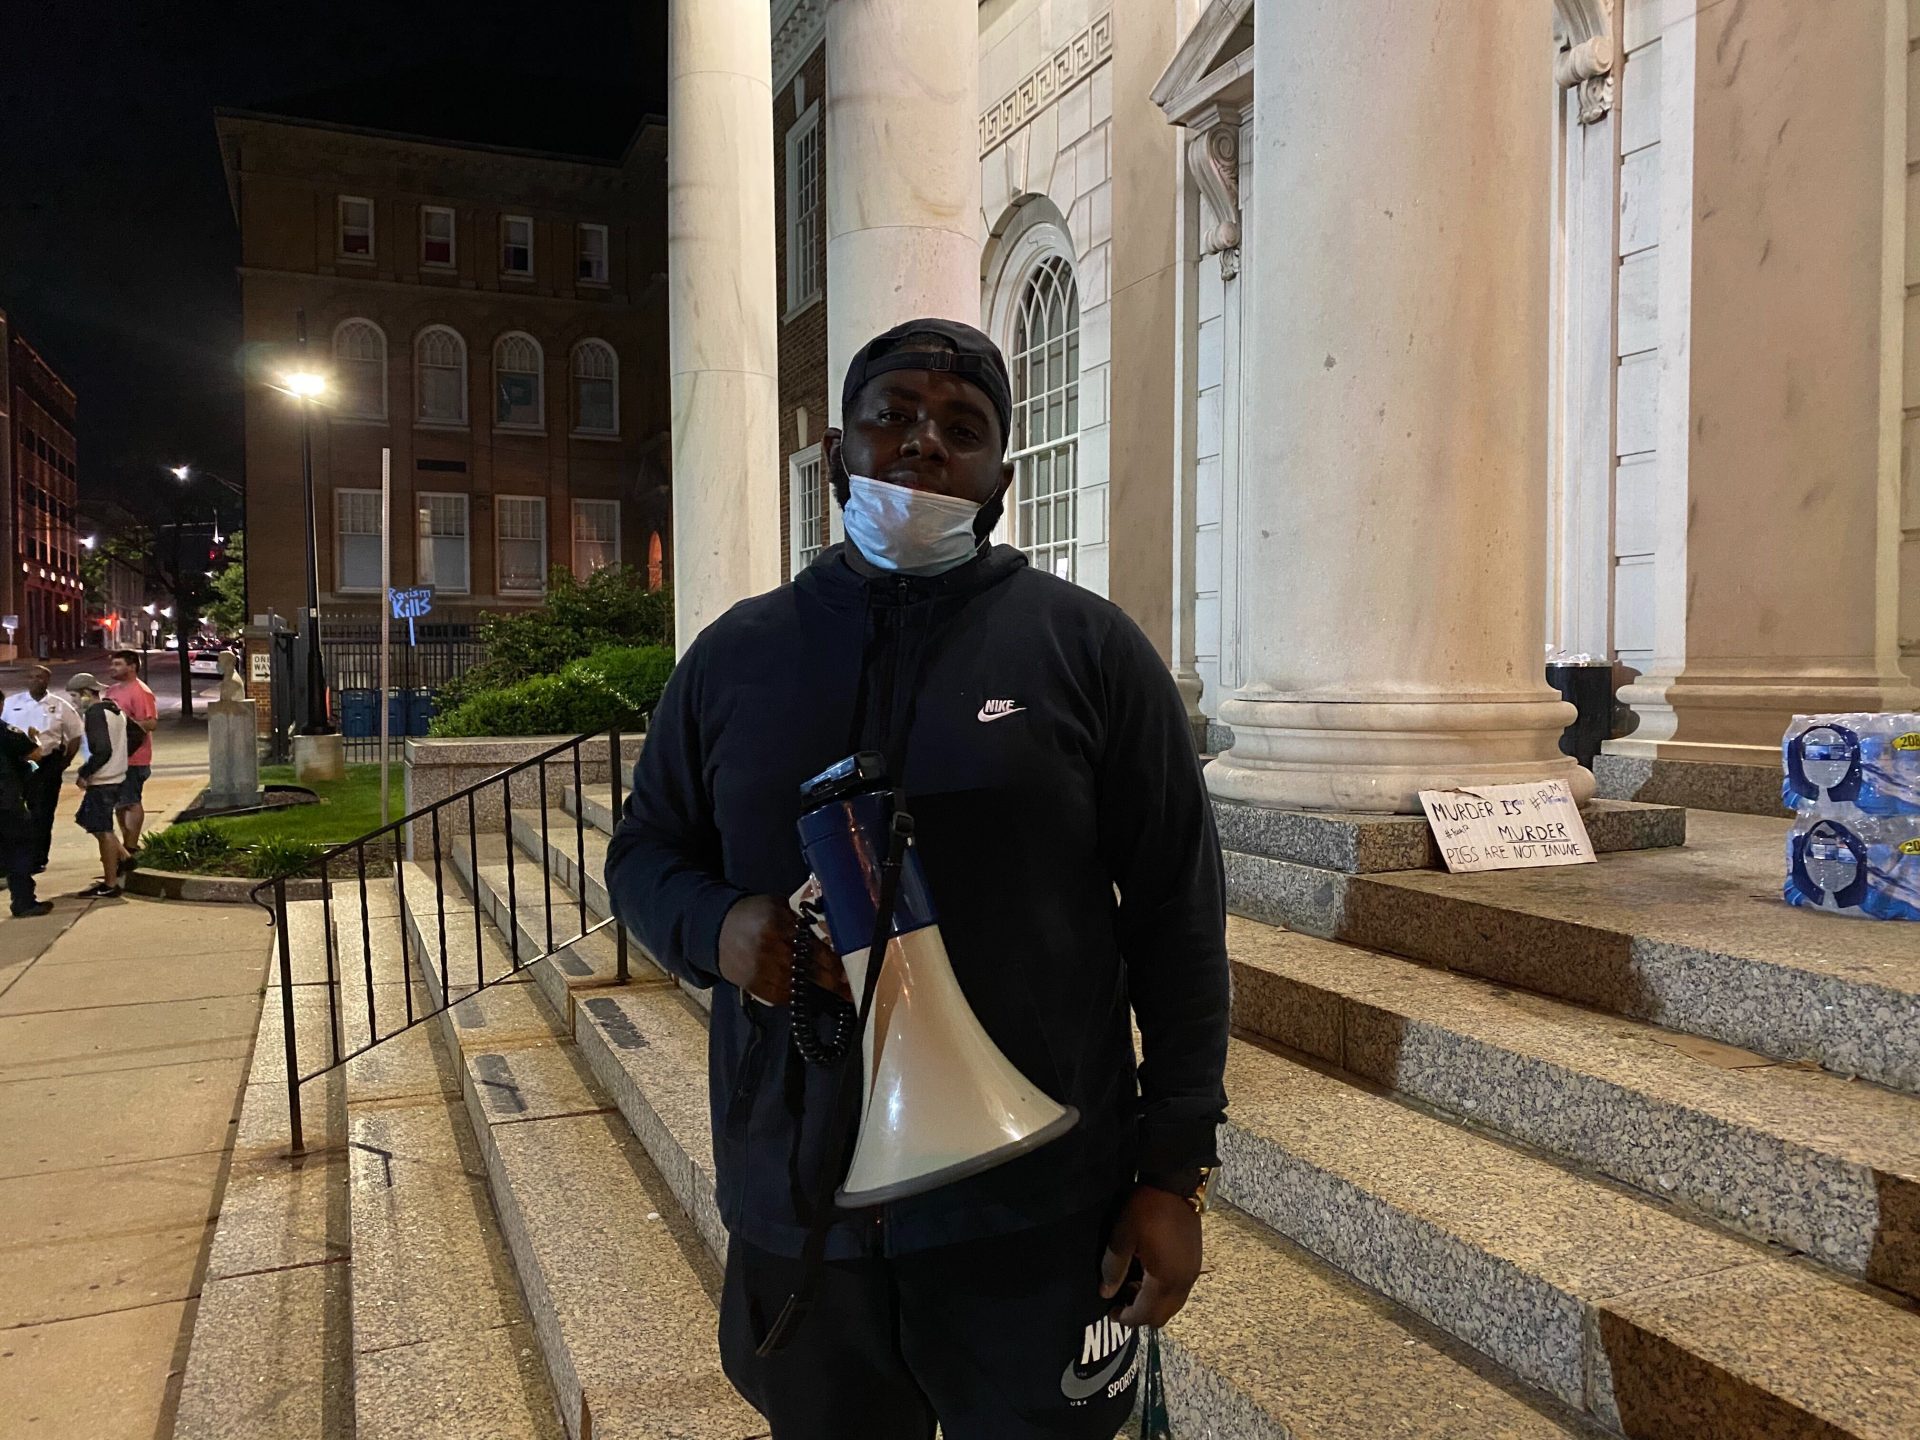 Harold Miller III lent his bullhorn to a group of protesters who formed on the steps of the York City Police Department Building on June 2.